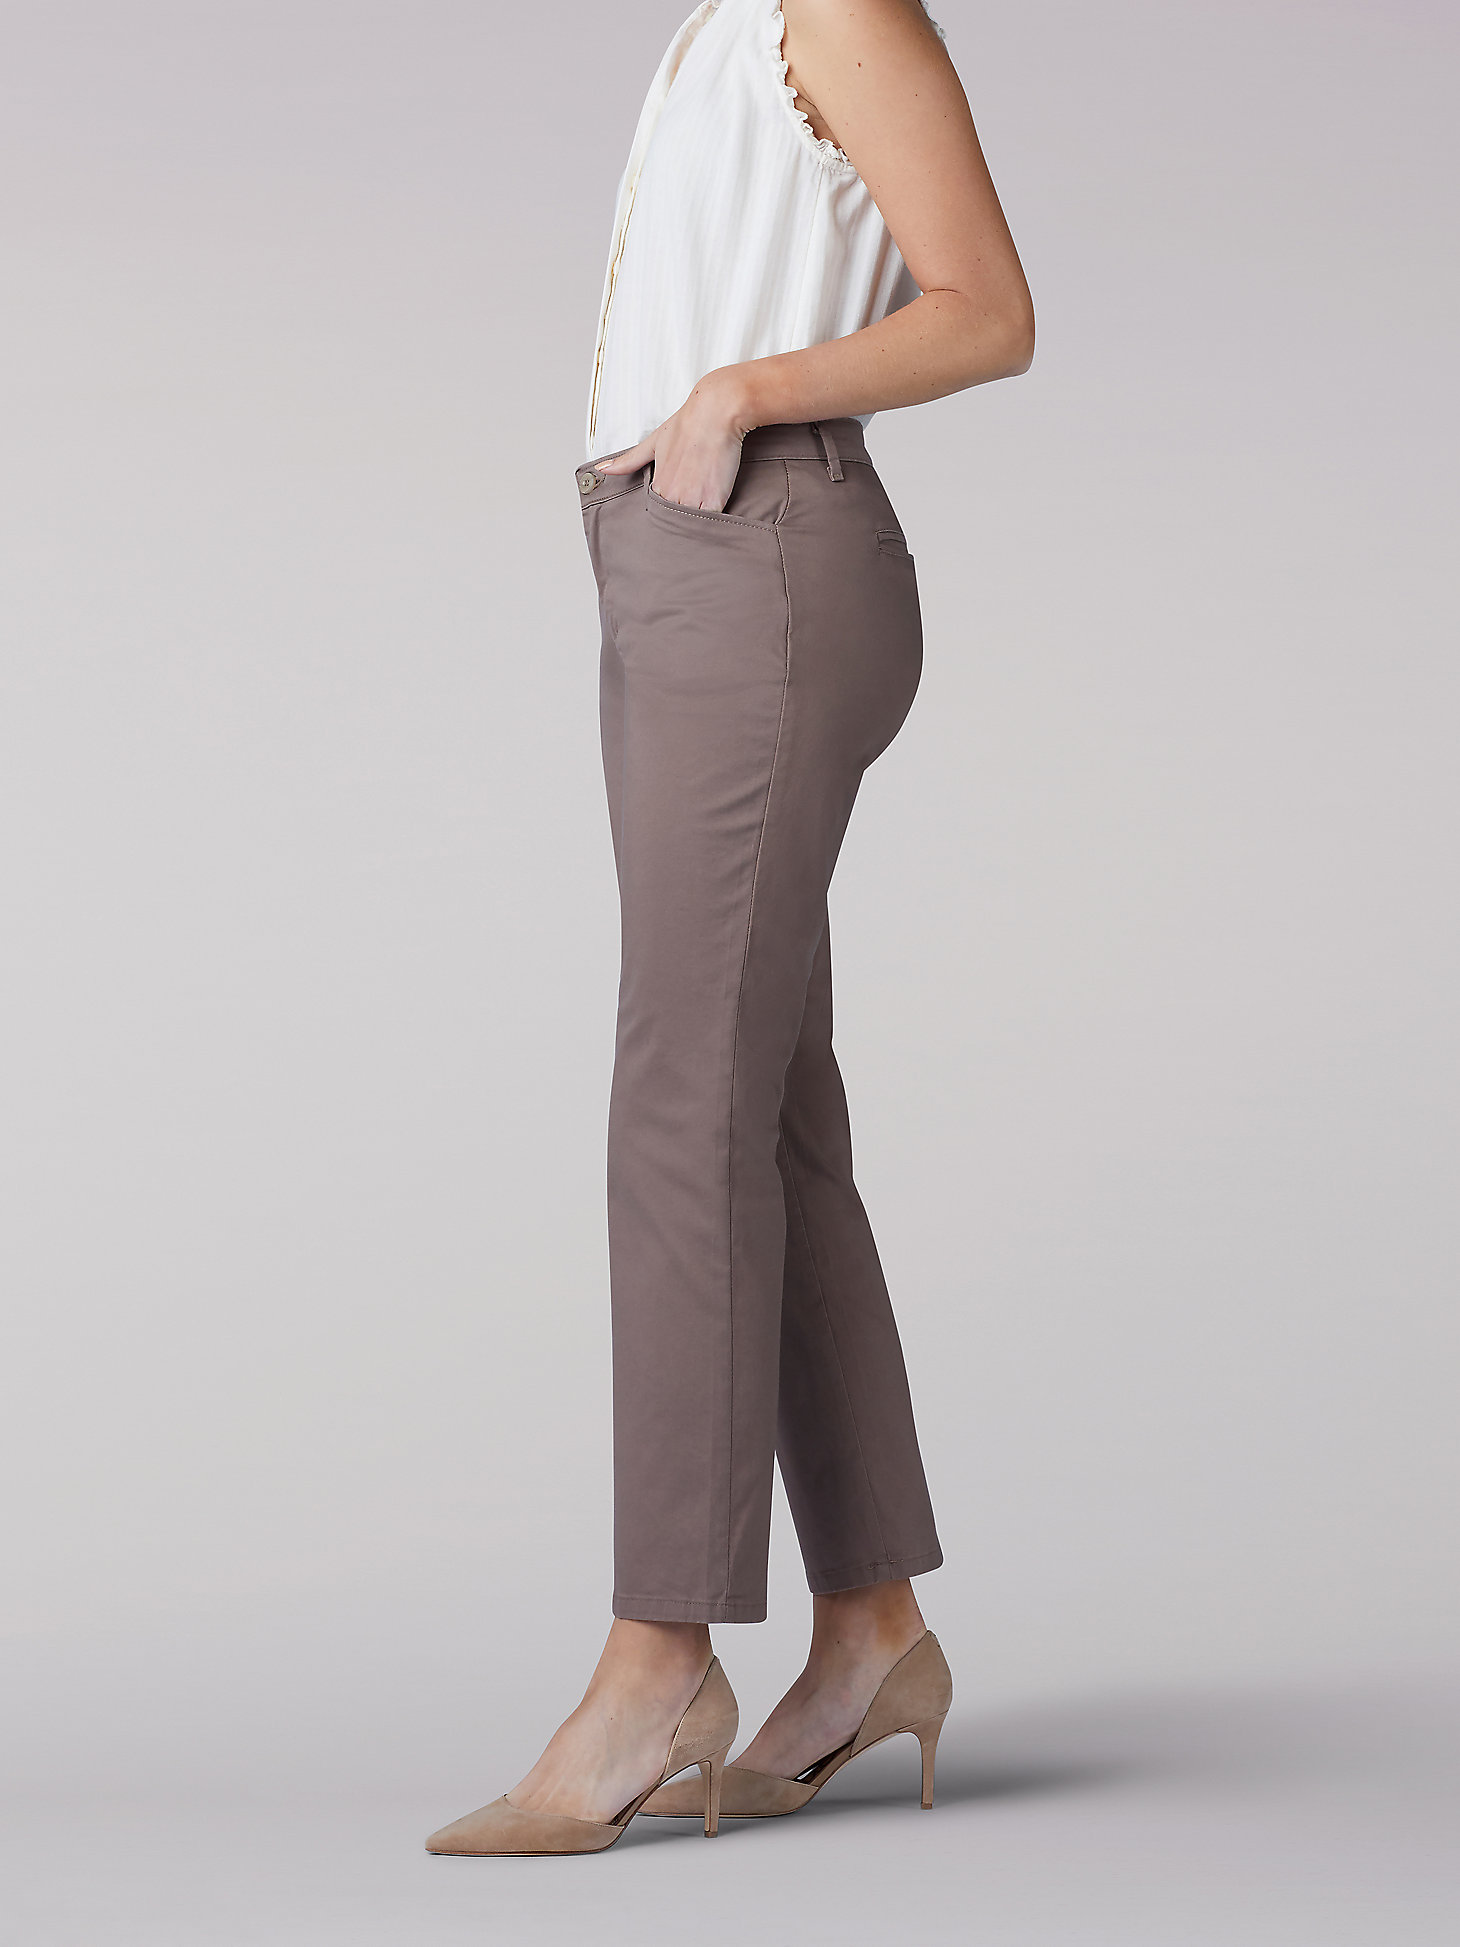 Women’s Relaxed Fit Straight Leg Pant (All Day Pant) (Petite) in Falcon alternative view 2